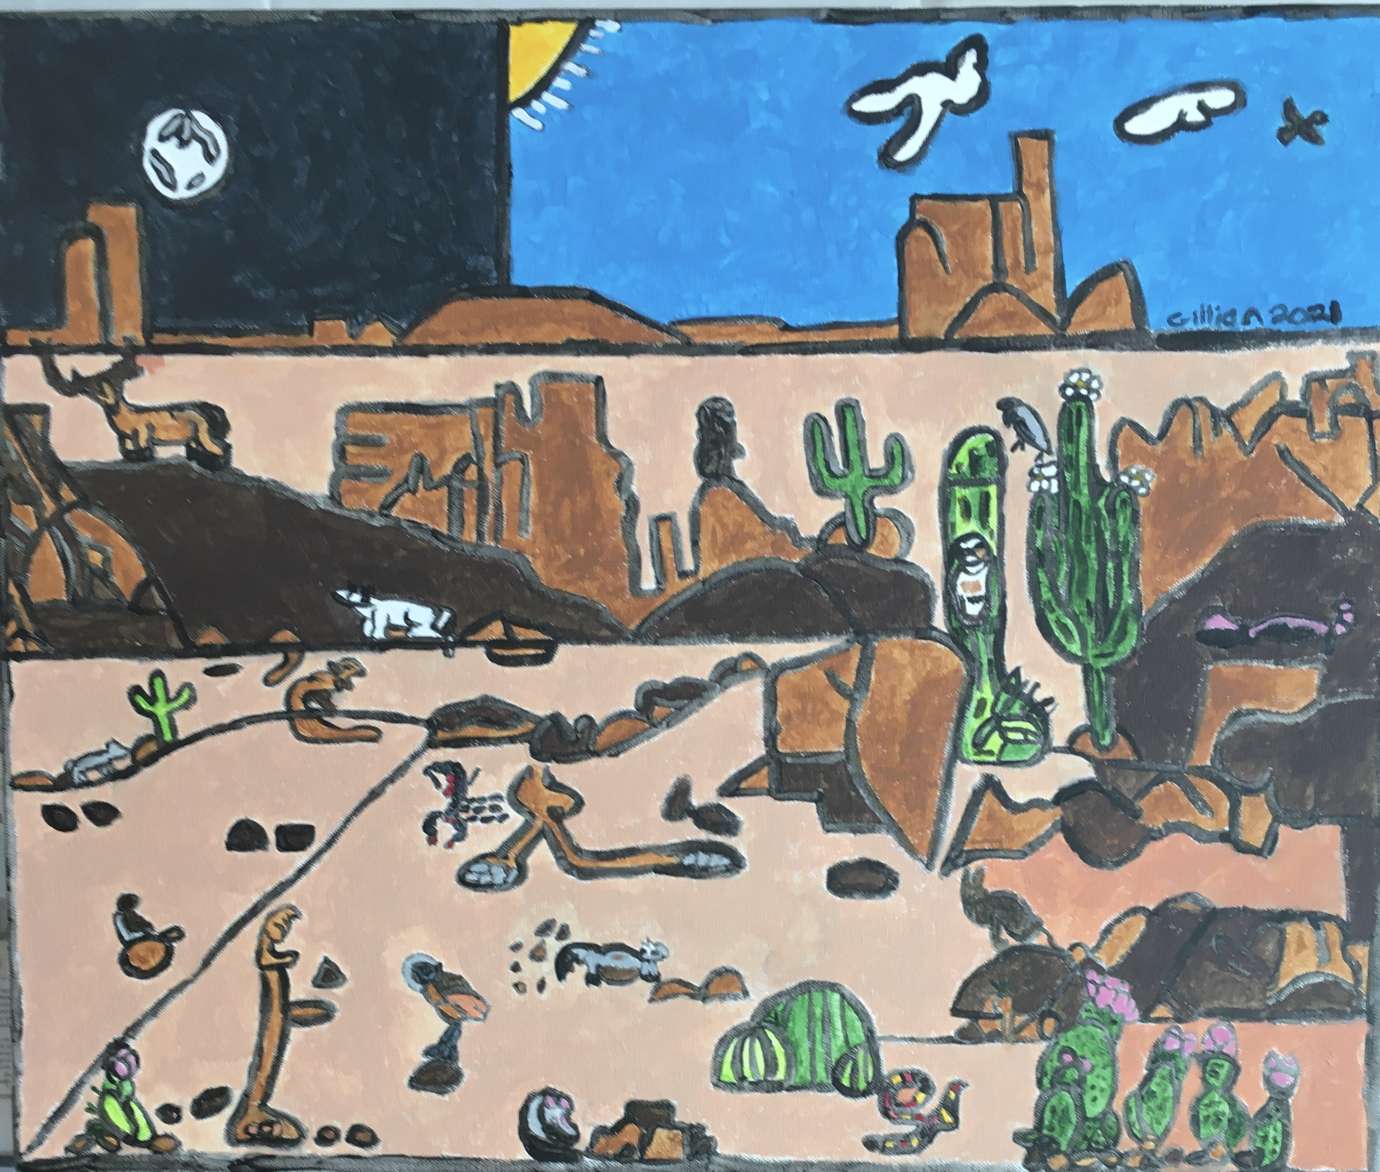 Desert scene with many little plants, cacti, animals, rocks, and people. Part of the sky is black with a moon and part is blue with a sun and cloud.s